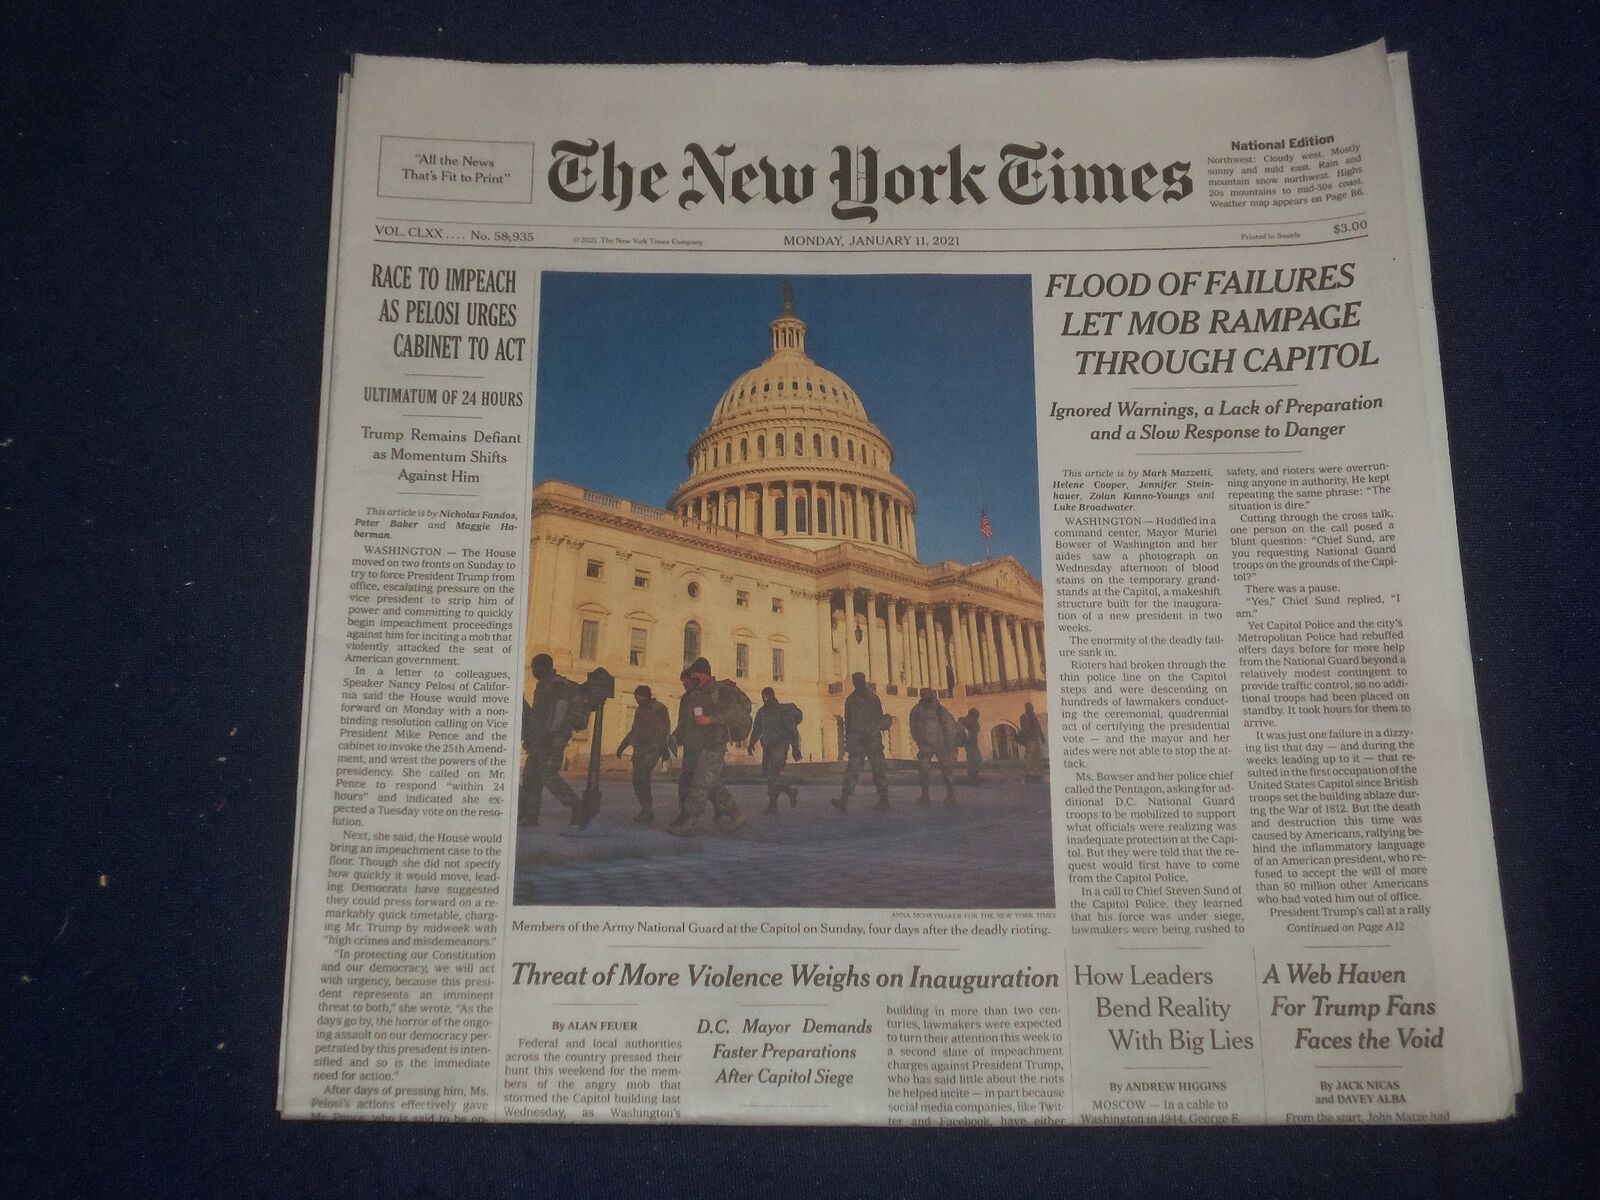 2021 JANUARY 11 NEW YORK TIMES-FLOOD OF FAILURES LET MOB RAMPAGE THROUGH CAPITOL